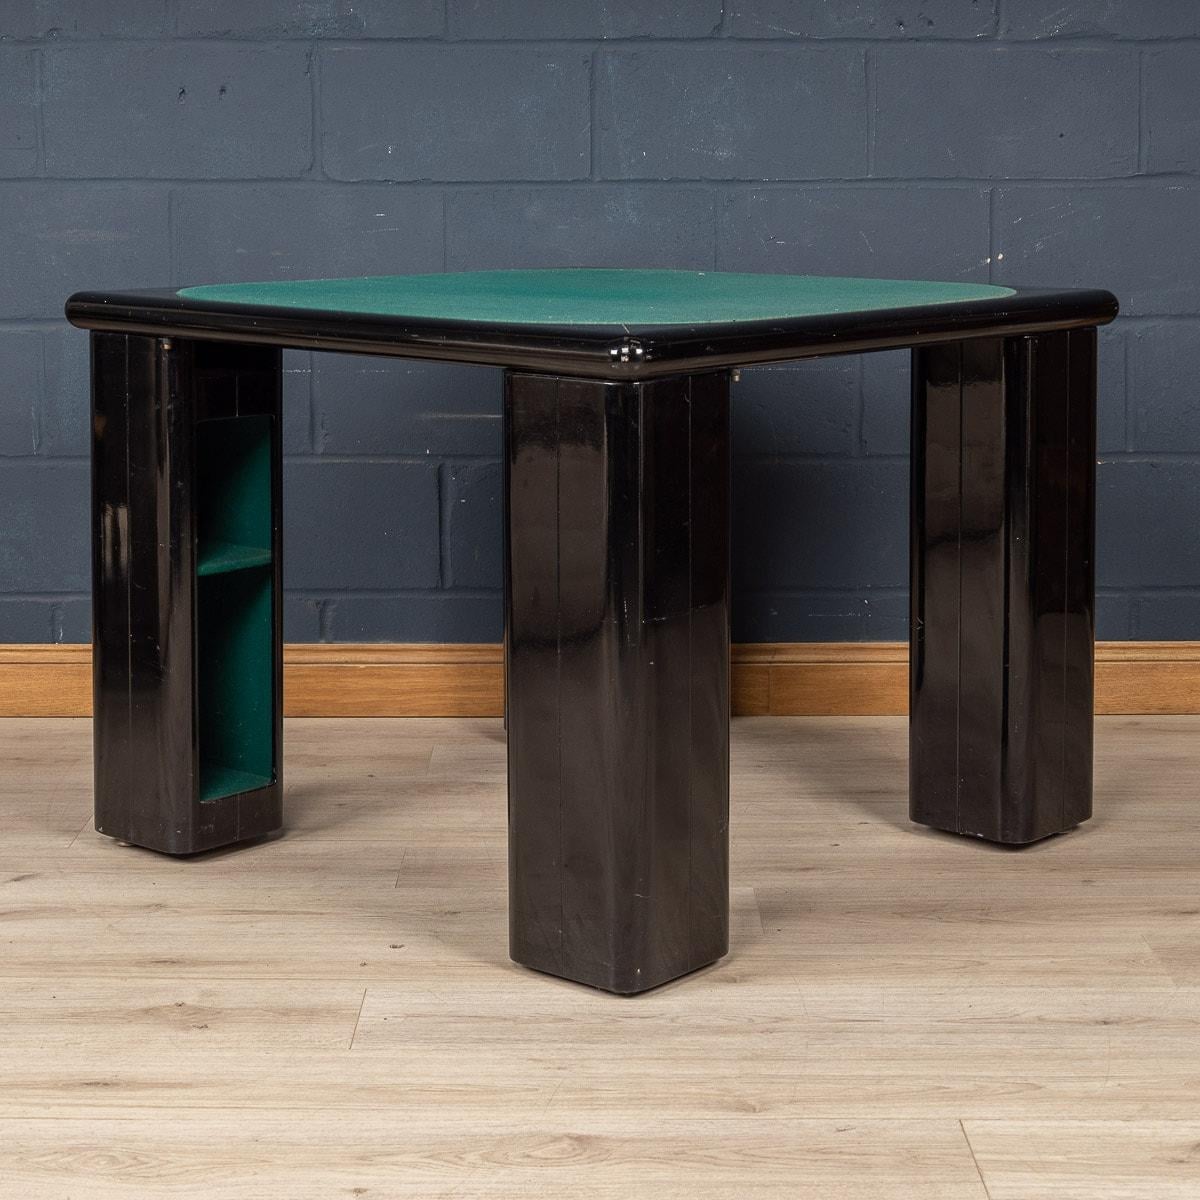 Lacquered Wood Games Table & Chairs by Pierluigi Molinari for Pozzi, Milan 1